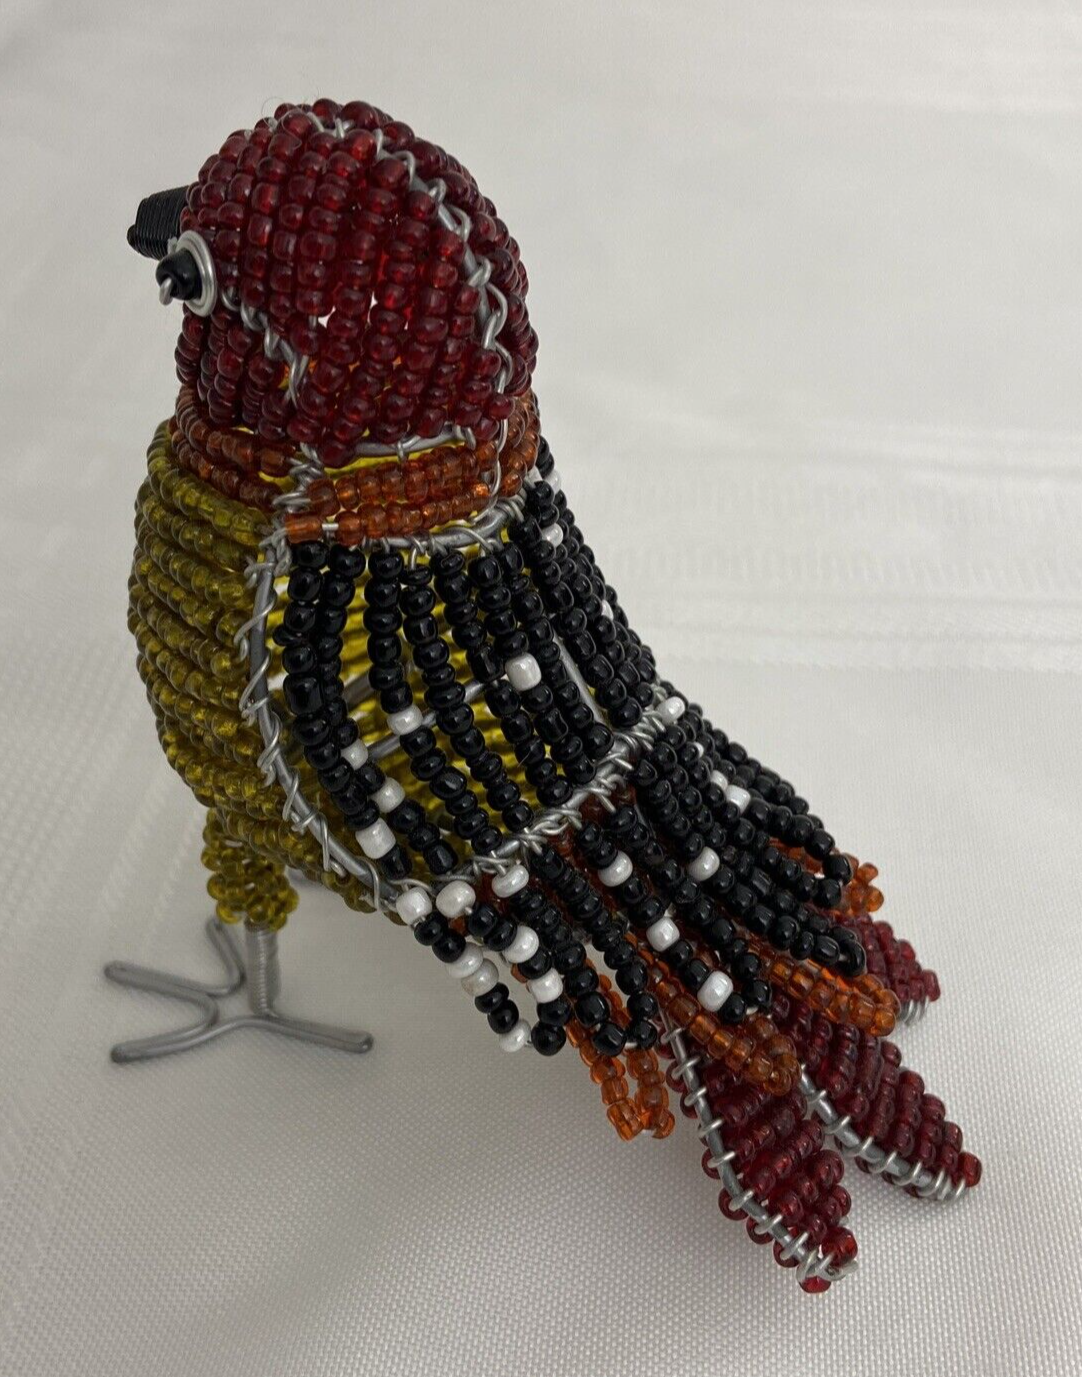 Handmade Beaded Bird Figurine On Wire African Folk Art Finch Statue Gift Idea - Flexi Africa - Flexi Africa offers Free Delivery Worldwide - Vibrant African traditional clothing showcasing bold prints and intricate designs